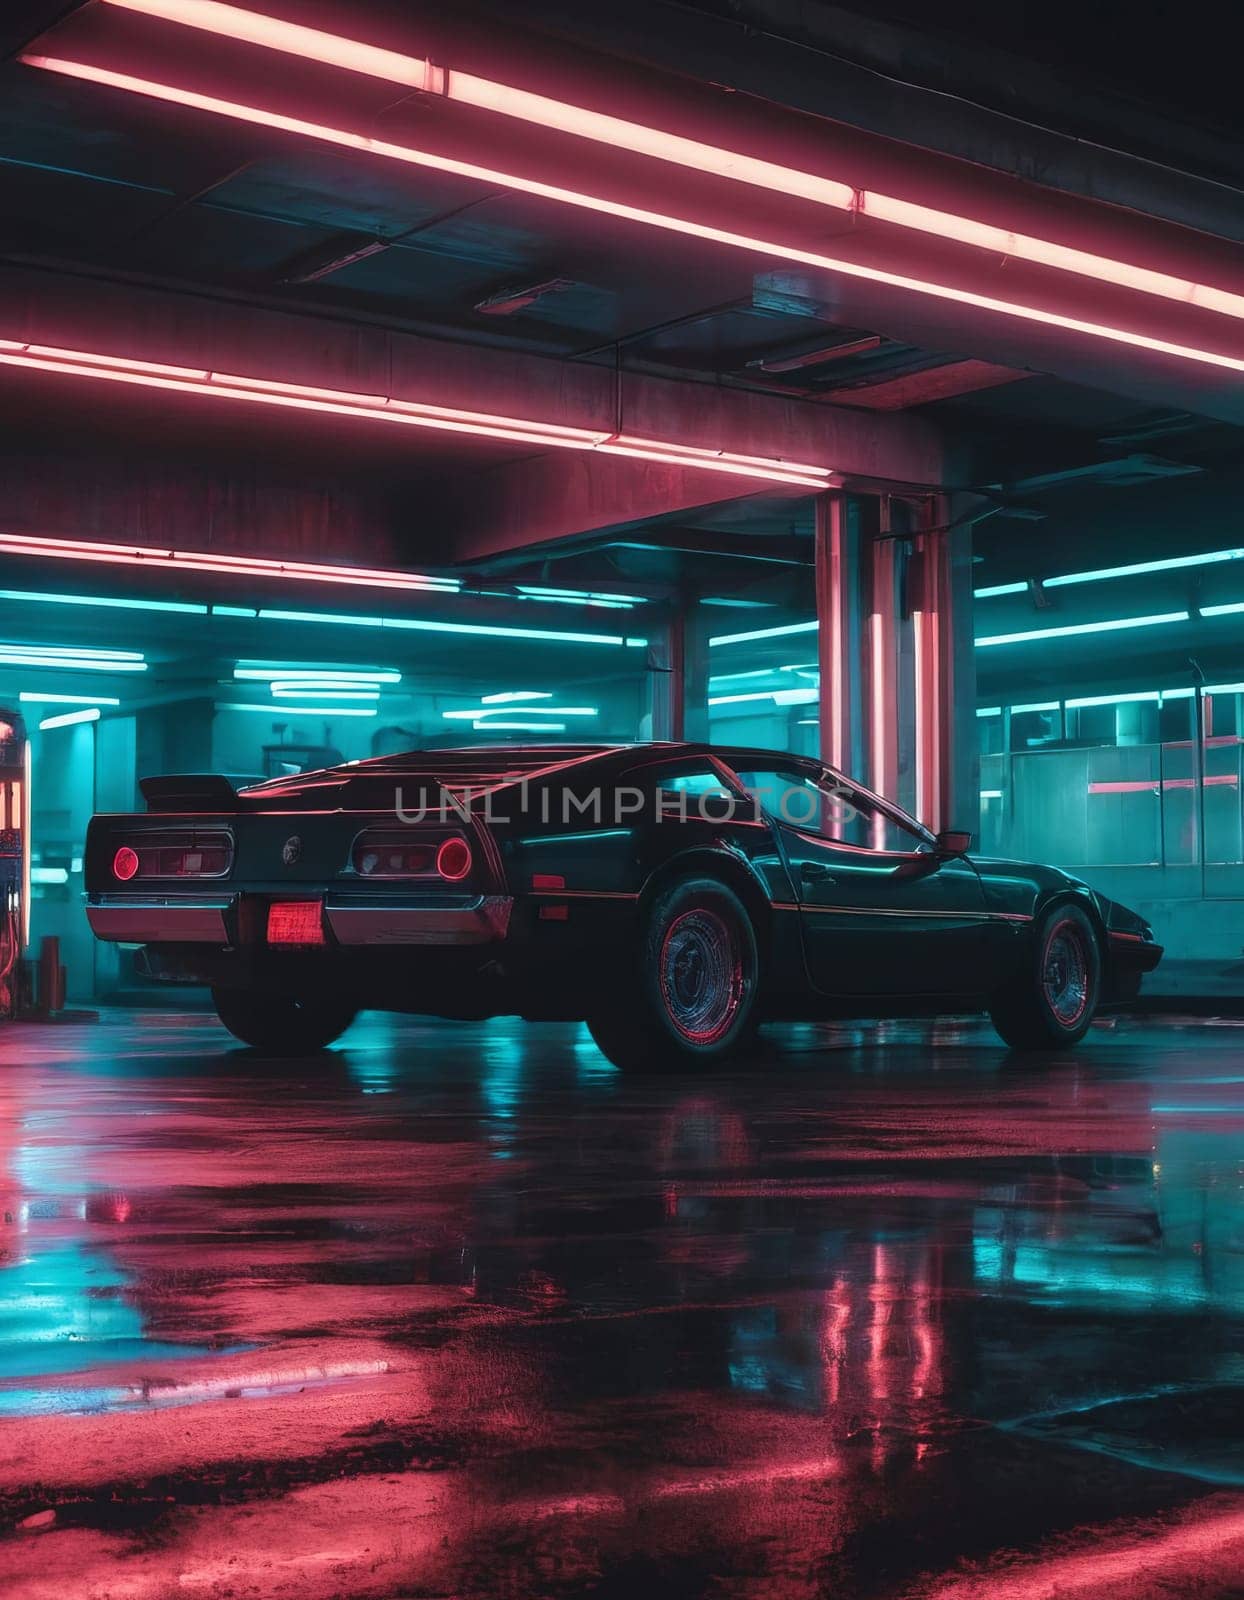 A black sports car parked in a neon-lit parking garage. The muscle car is a classic model with a sleek design and the garage is bathed in pink and blue light